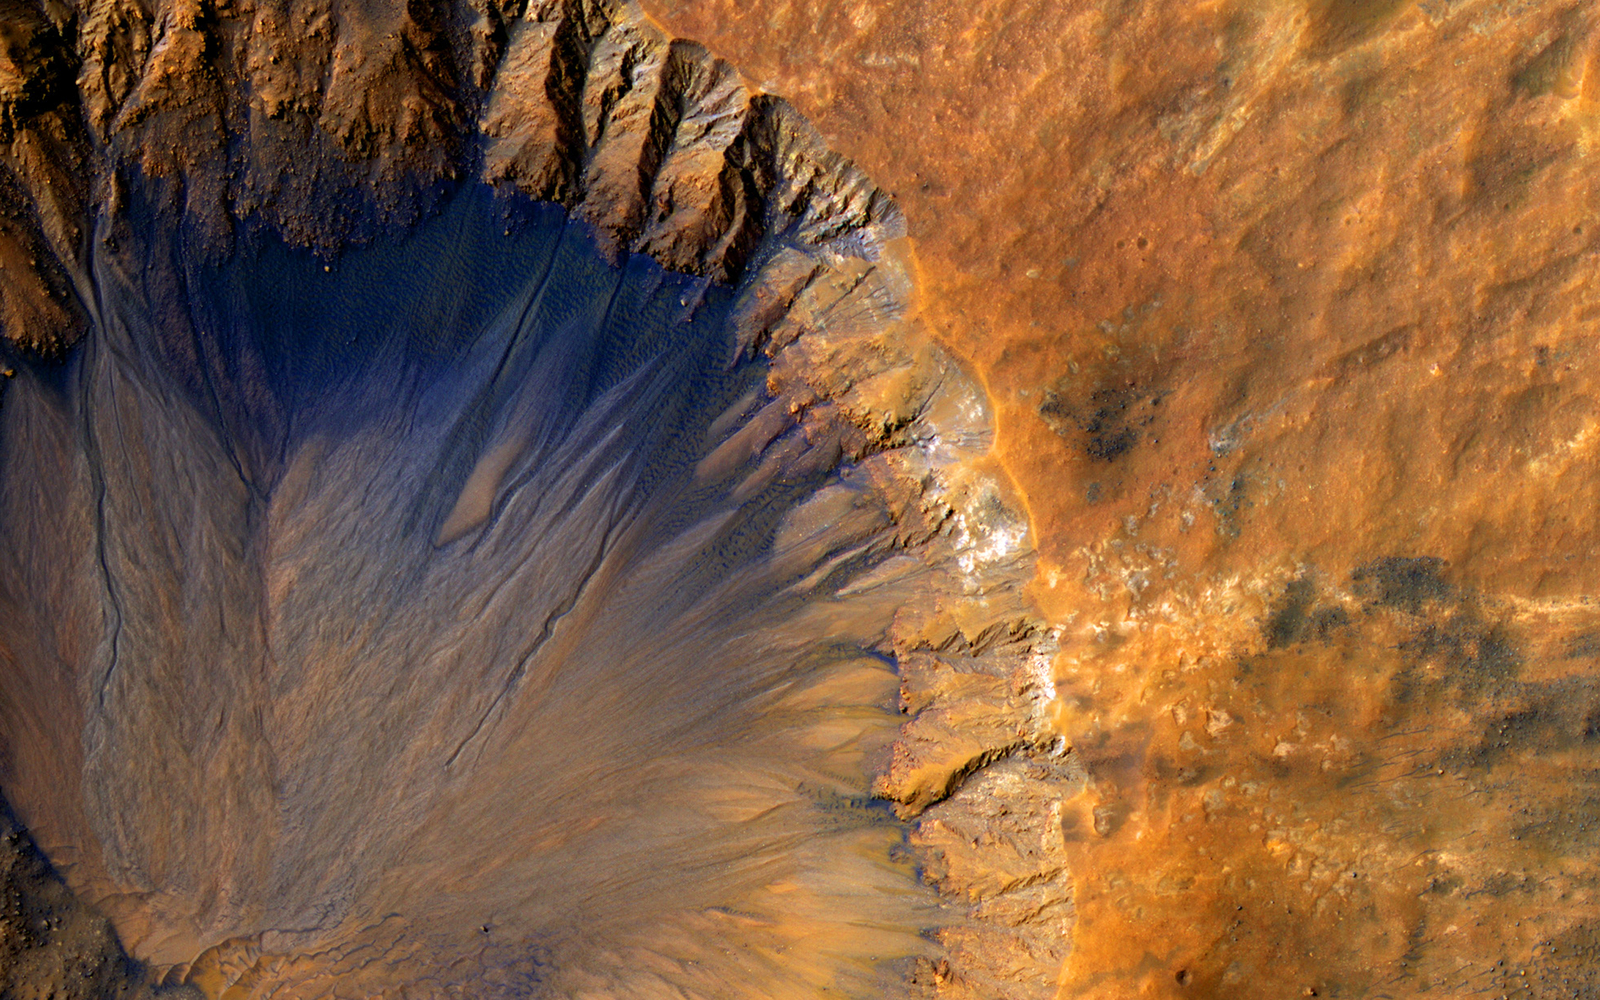 A crater in the ground on Mars